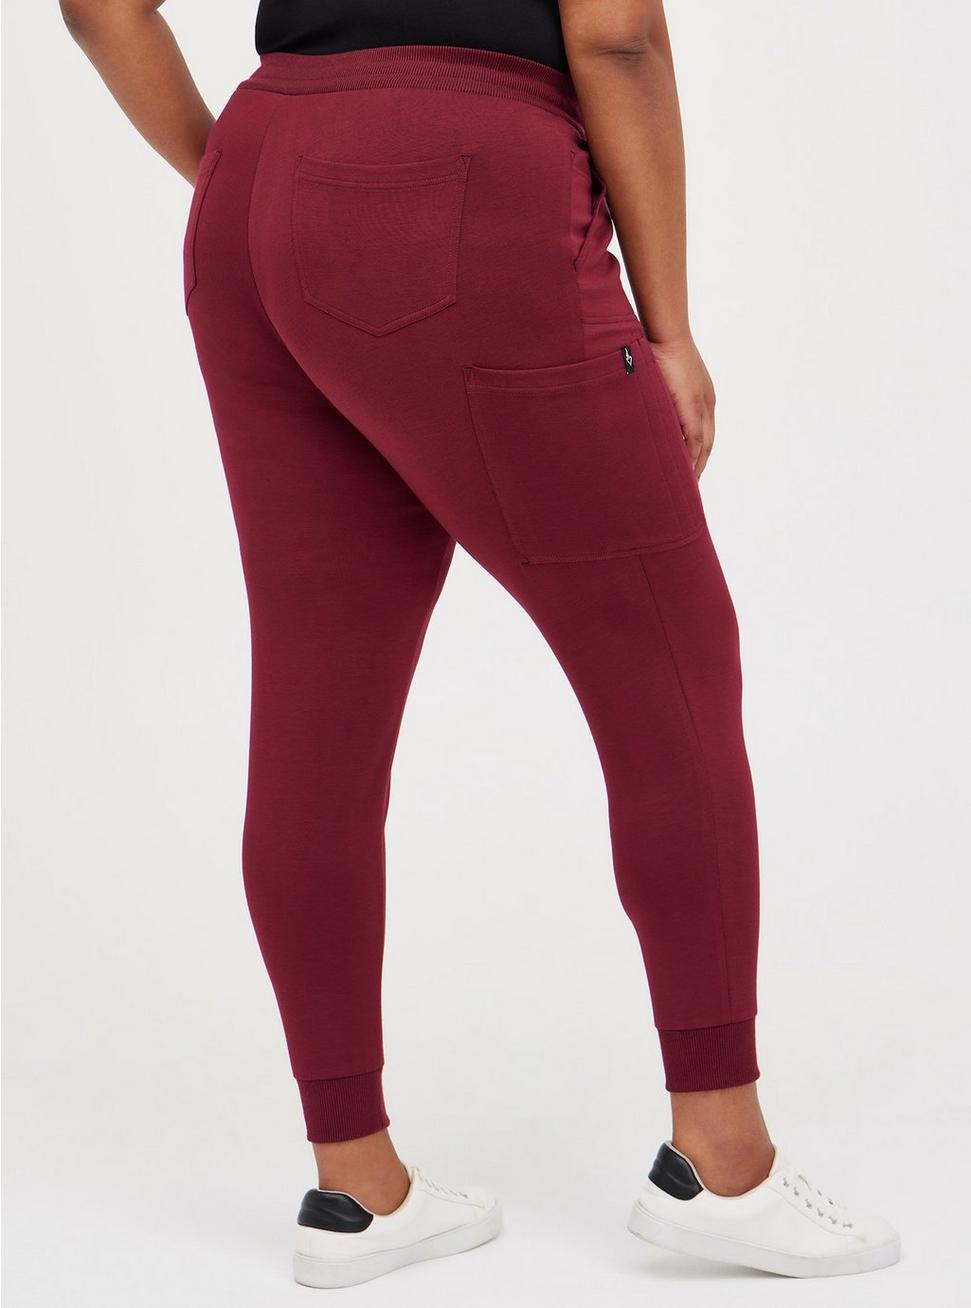 Plus Size - Torrid Strong Cupro Relaxed Jogger Scrub Pant - Torrid